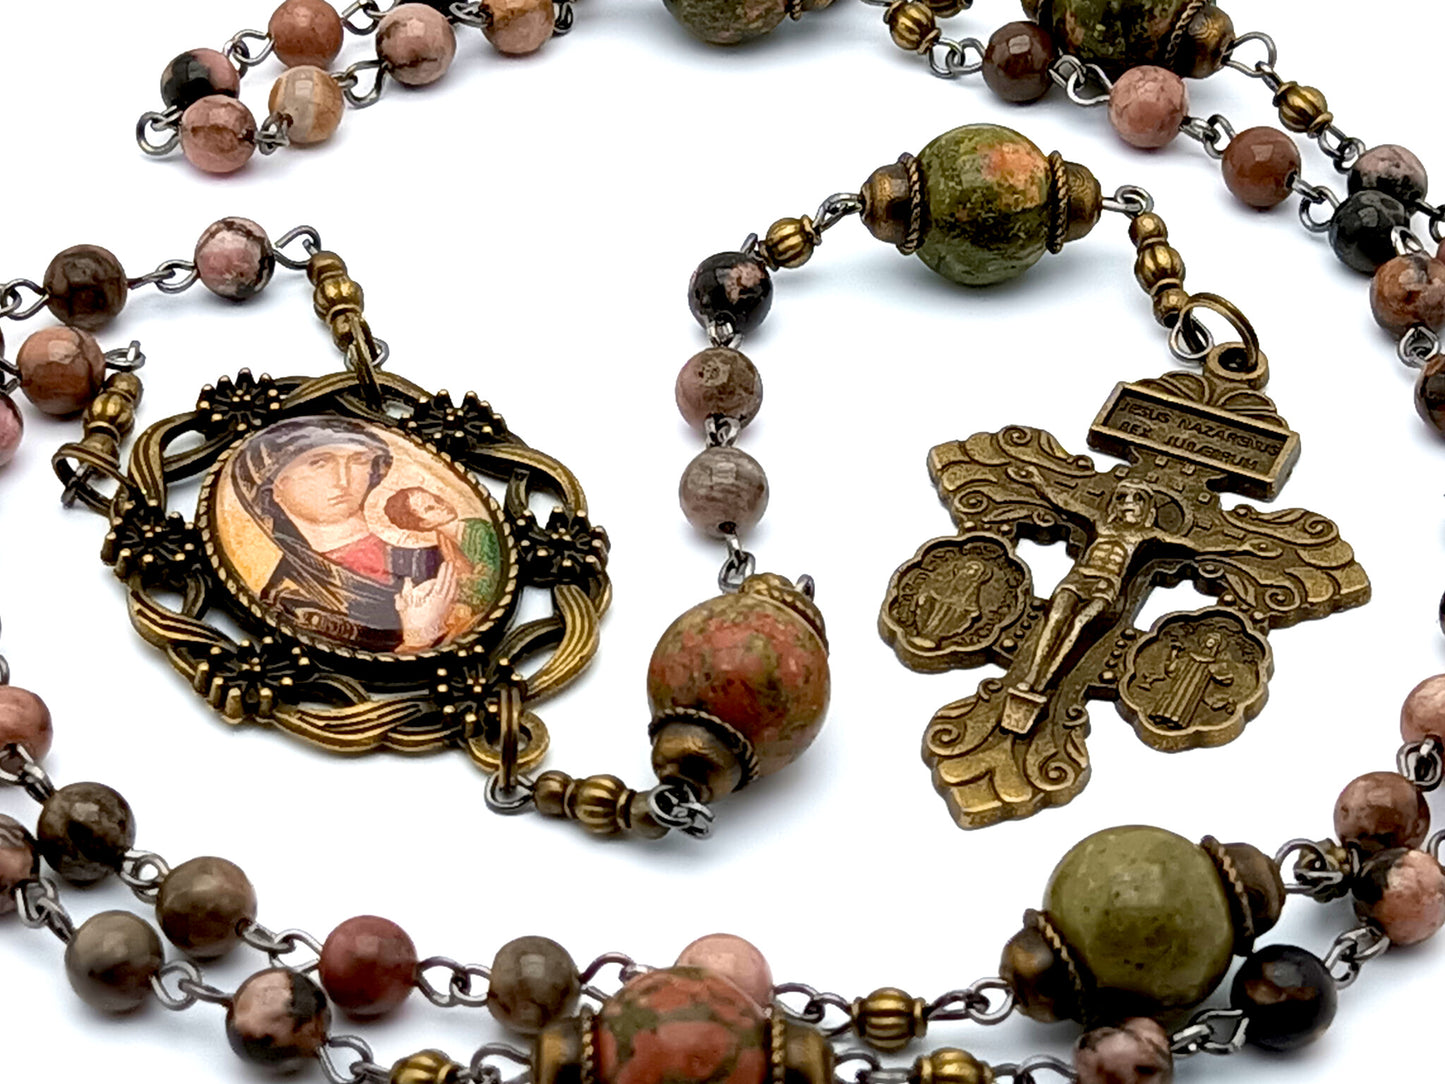 Vintage style Our Lady of Perpetual Help unique rosary beads with rhodonite gemstone beads and brass medal Miraculous medal crucifix.